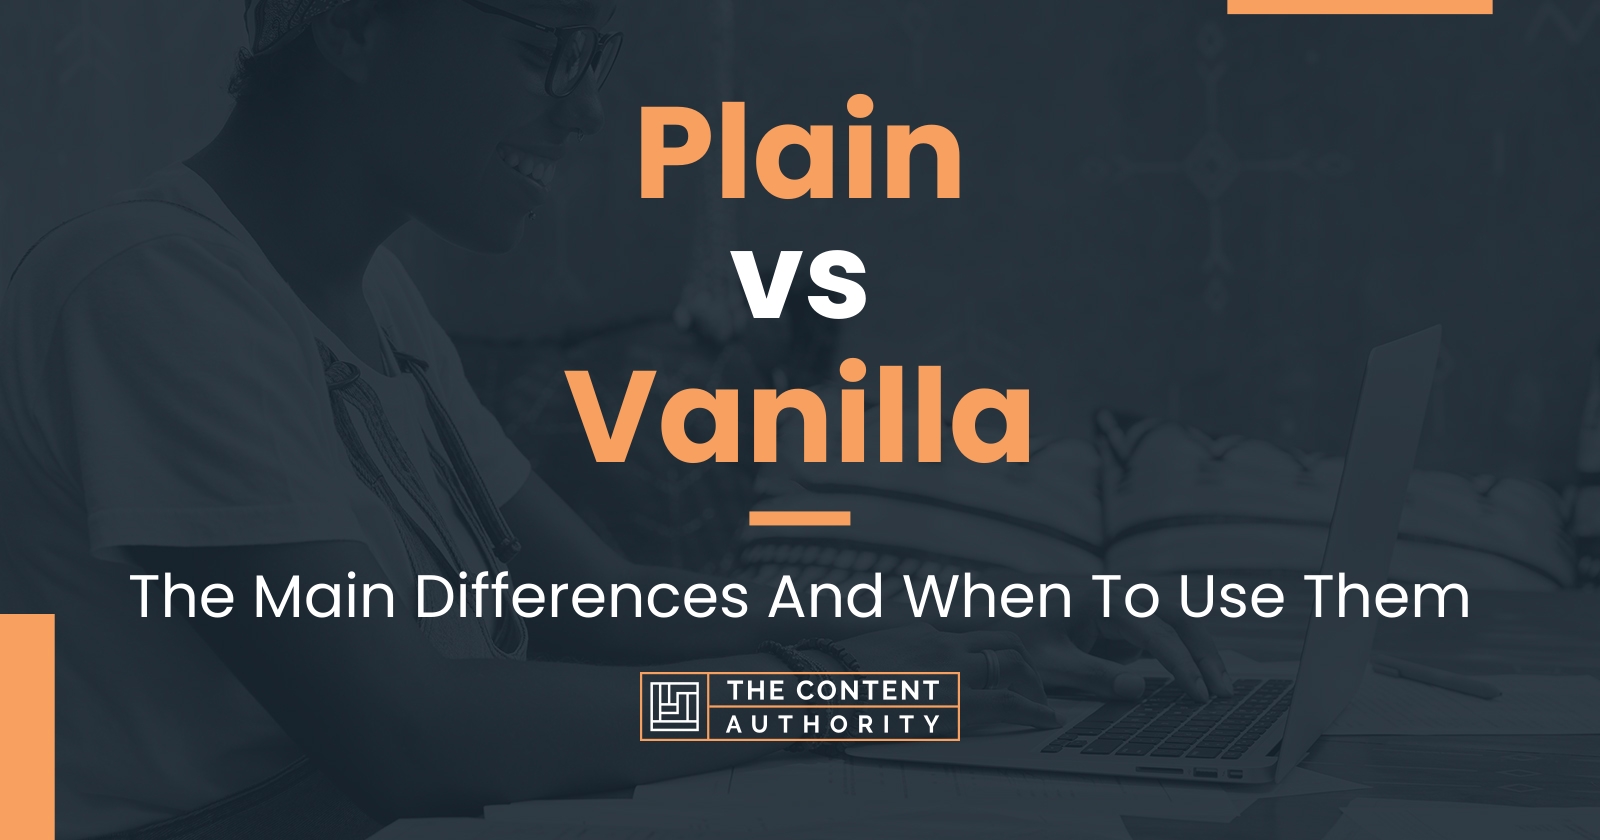 Plain vs Vanilla: The Main Differences And When To Use Them